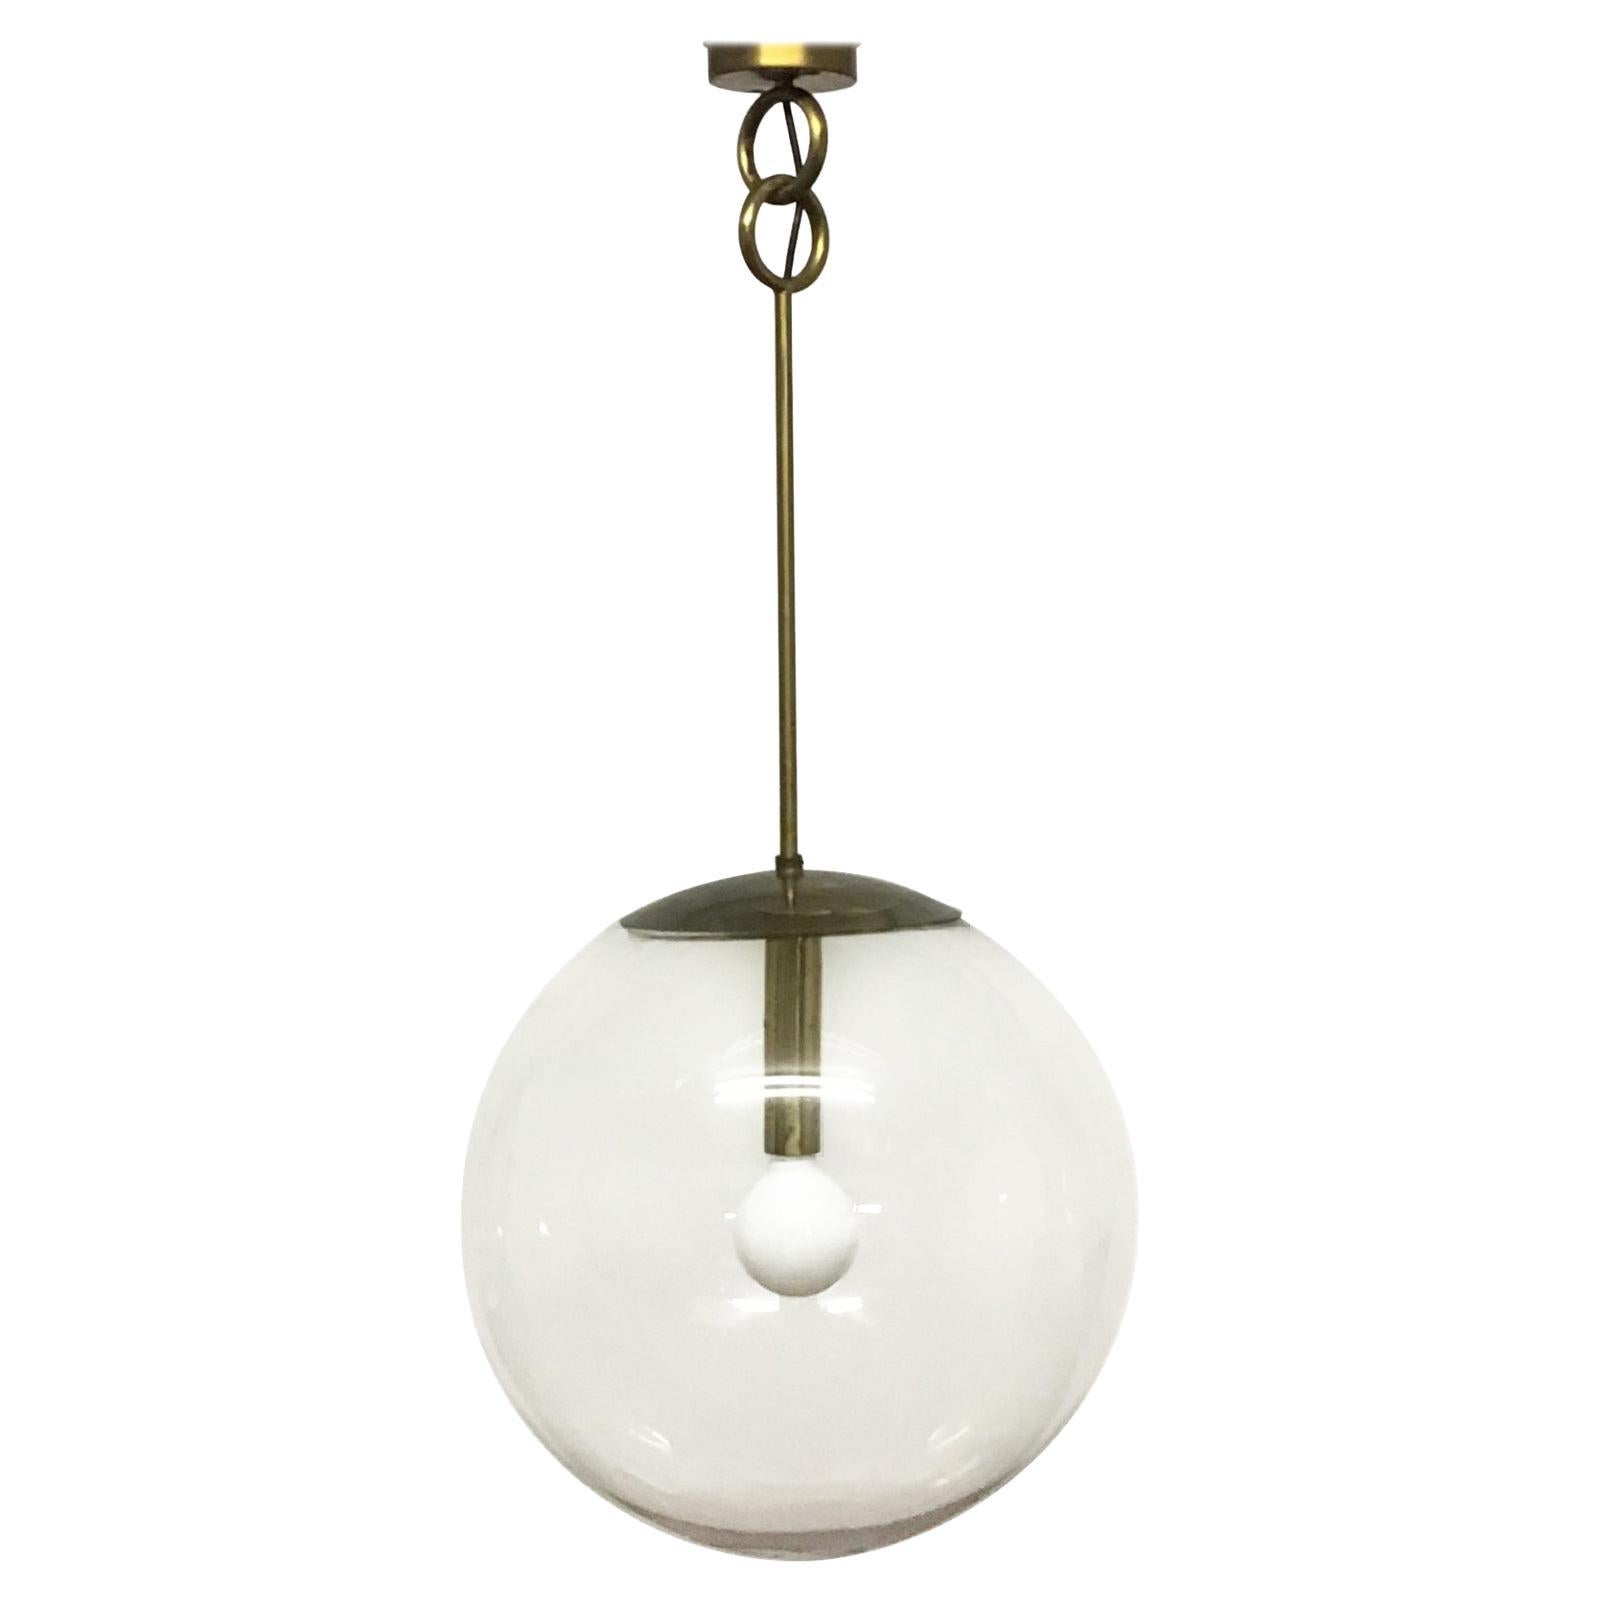 An extra large mid -century glass globe (20.47 inches in diameter ) pendant hanging on brass attr. to Geateno Sciolari, Italy, circa 1960s.
Diameter: 20.47 inches 
Socket: 1 x Edison E27 or E26 (US) for standard screw bulb.
The condition is